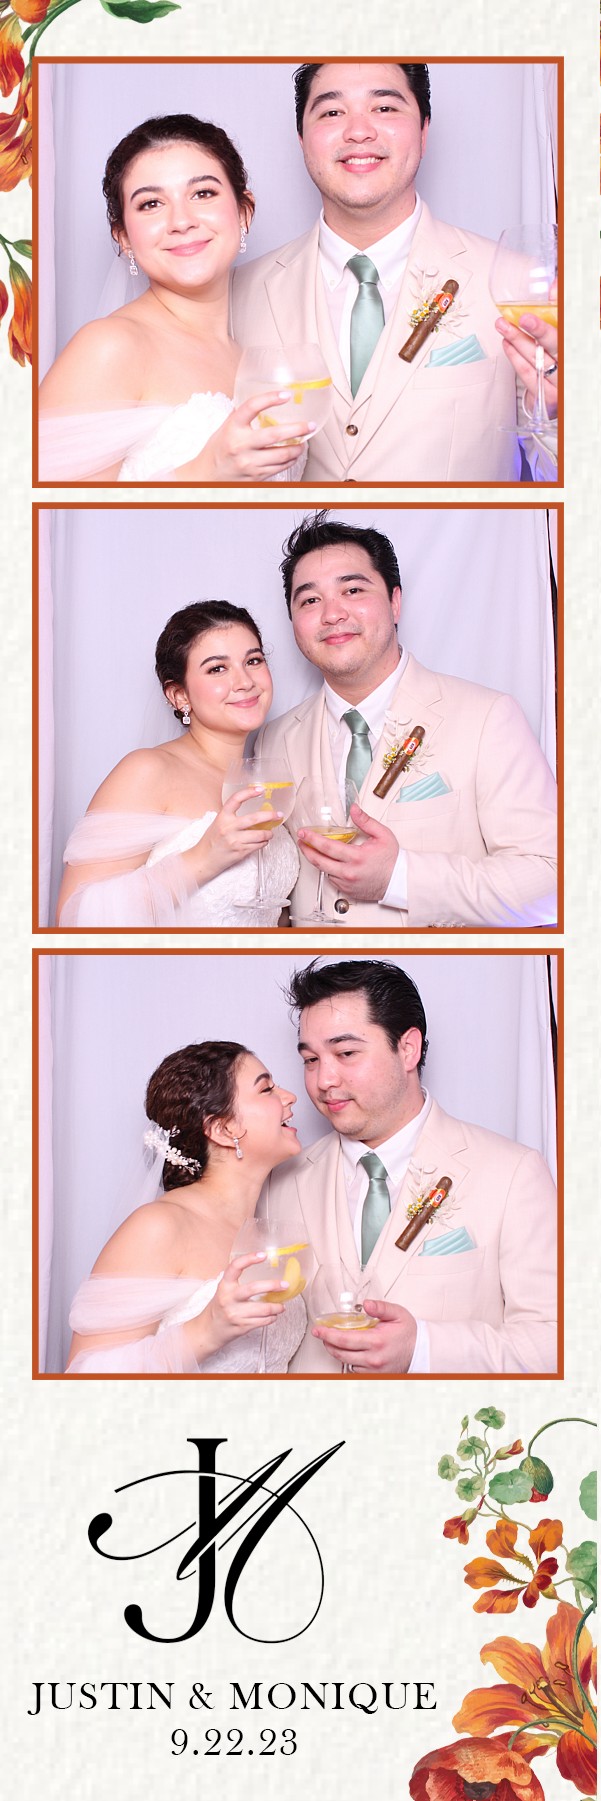 Justin and Monique’s Wedding – Vintage Booth